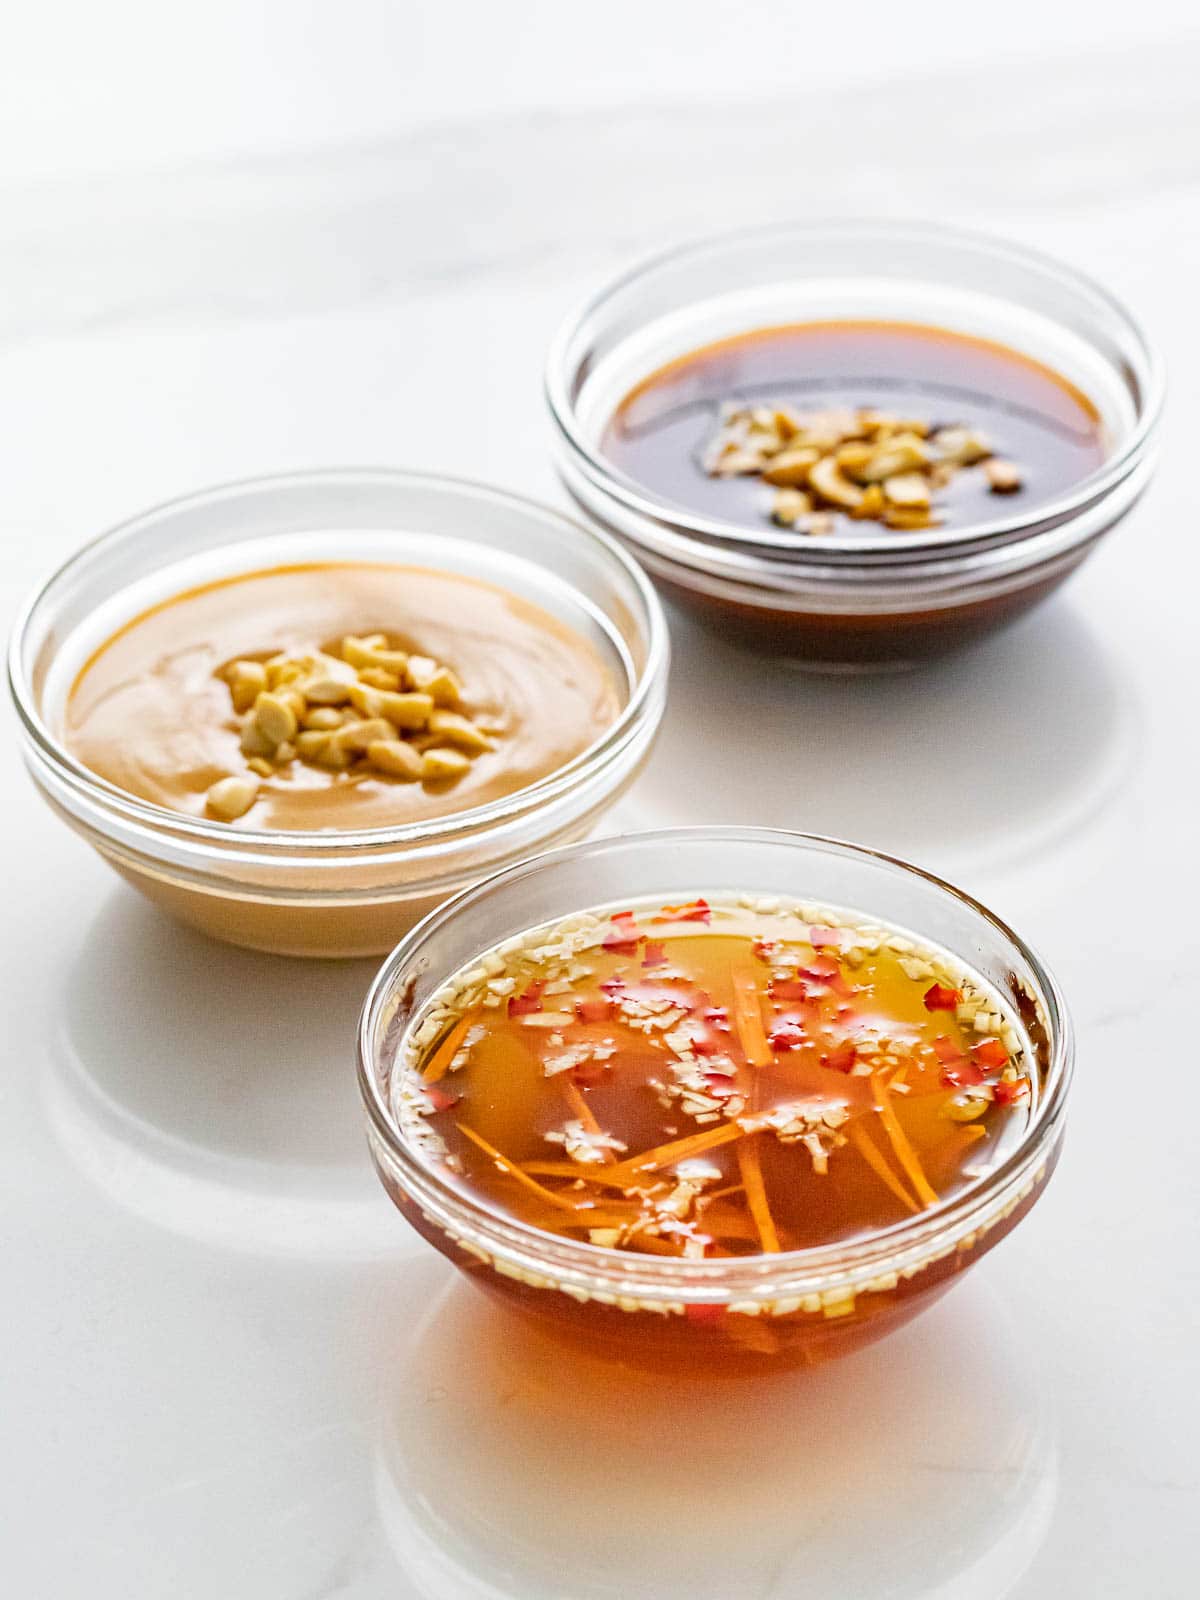 three bowls of spring roll sauces including peanut, hoisin, and fish sauce